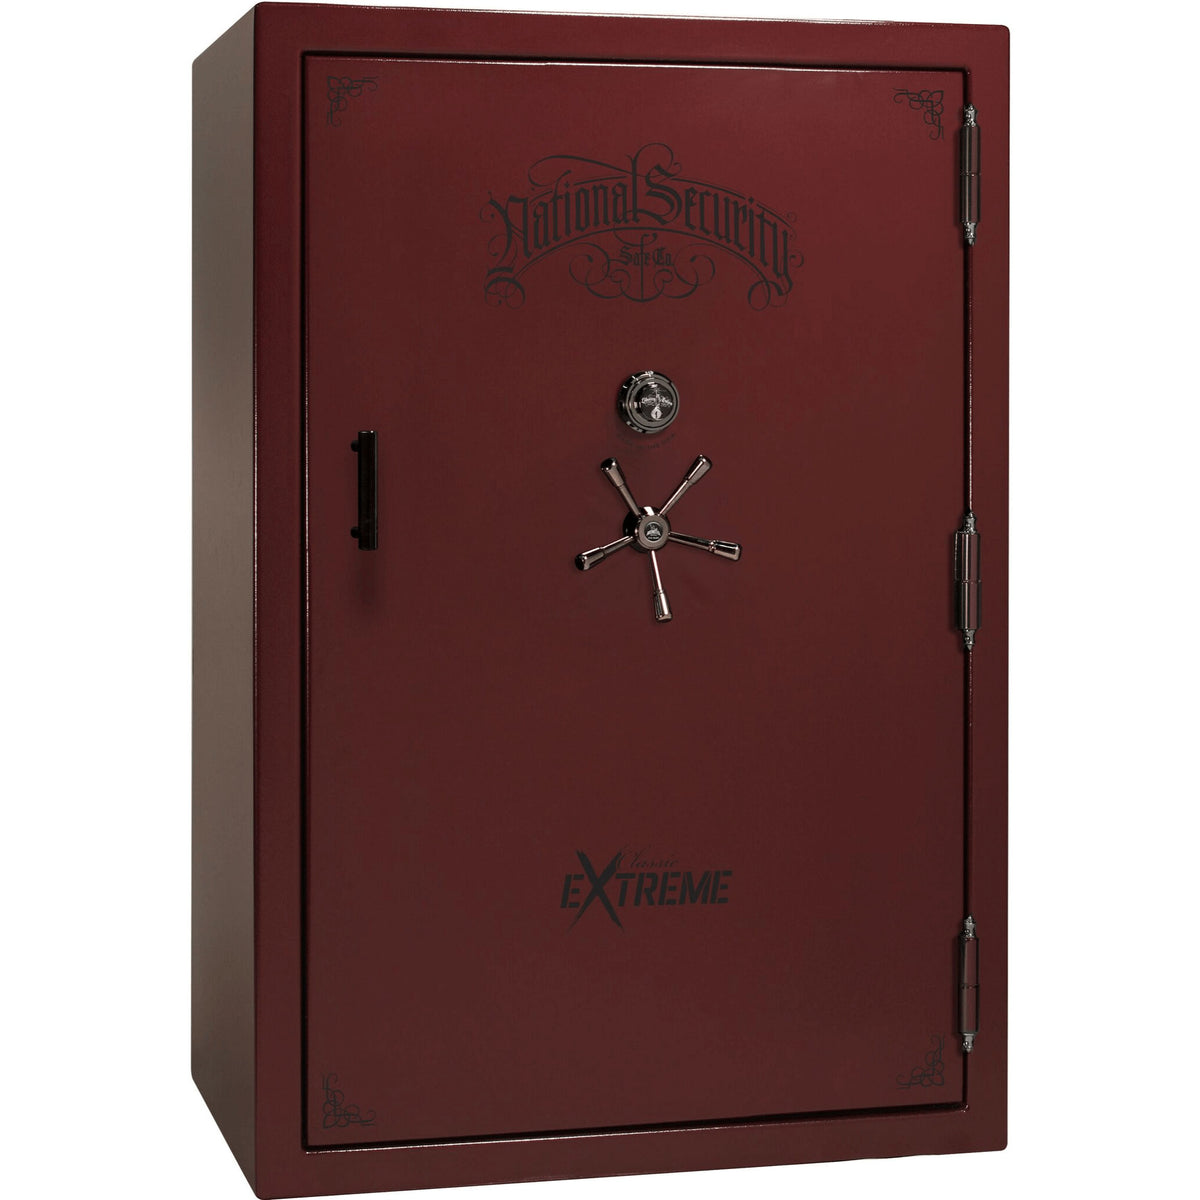 Liberty Classic Select Extreme Wide Body Safe in Burgundy Gloss with Black Chrome Mechanical Lock.